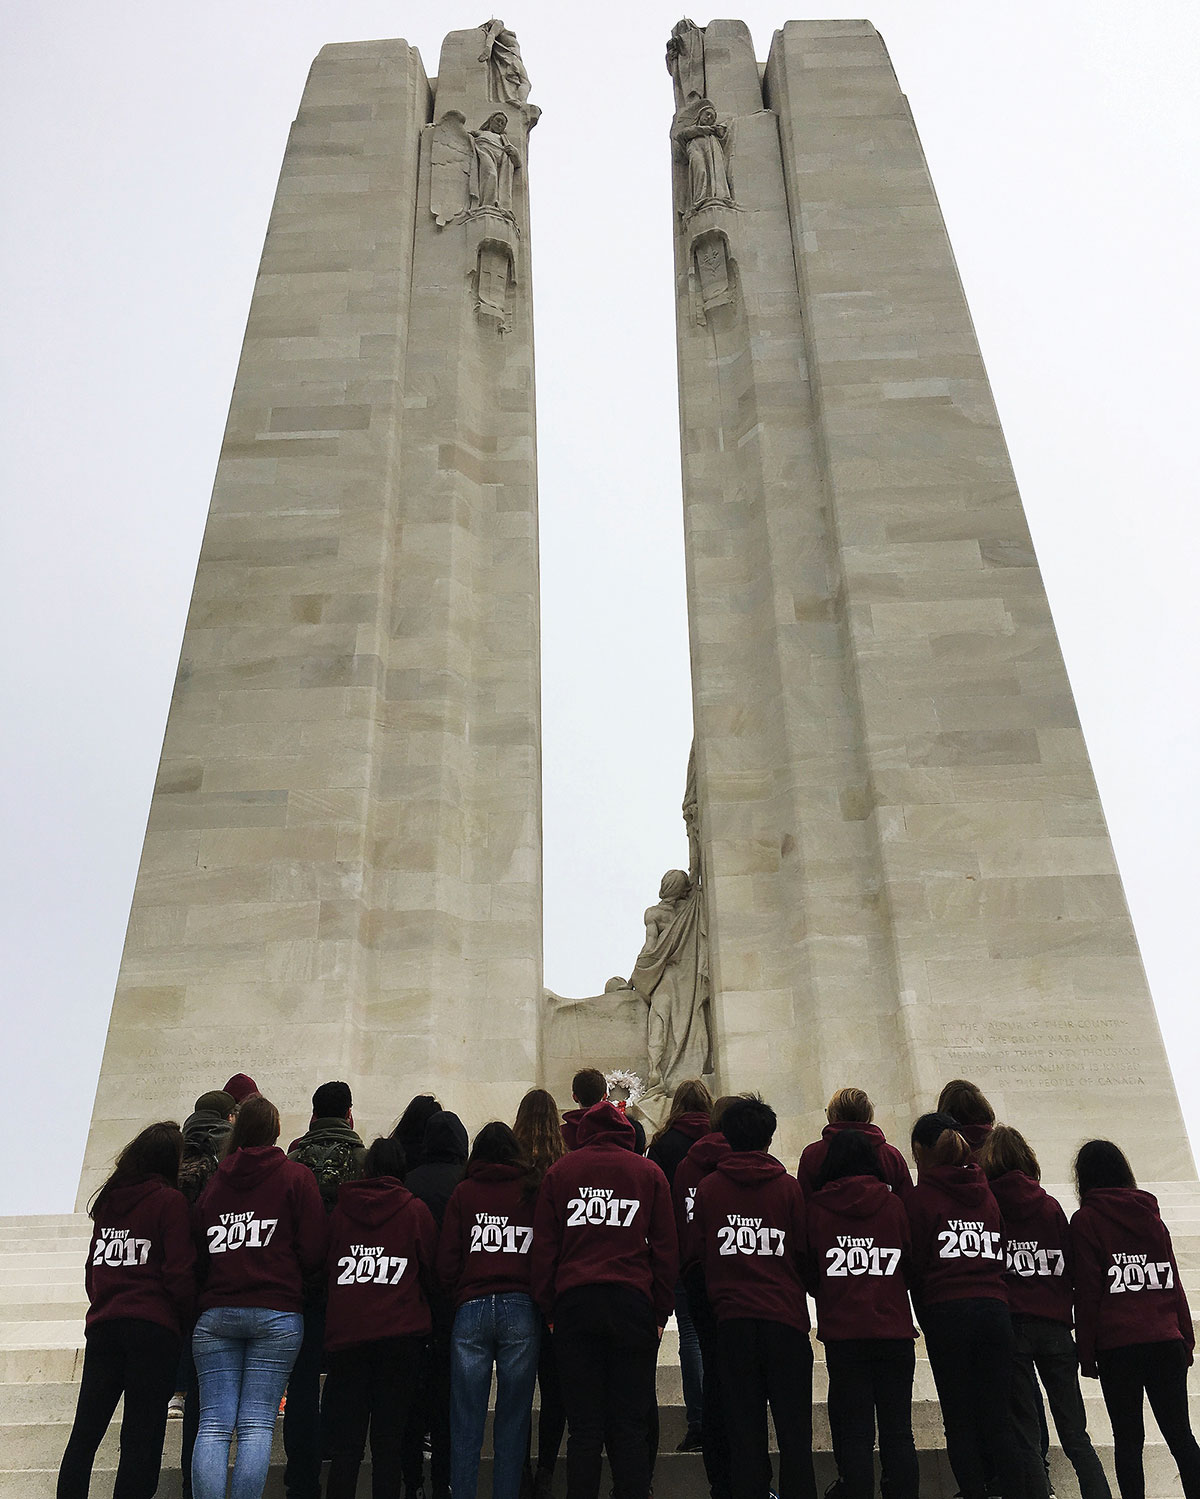 In March 2017, CCVI students, along with their history teachers, travelled to France. The motivation for the trip was to mark the 100th anniversary of the Battle of Vimy Ridge, honouring the role that Canada played in the historic WWI battle.